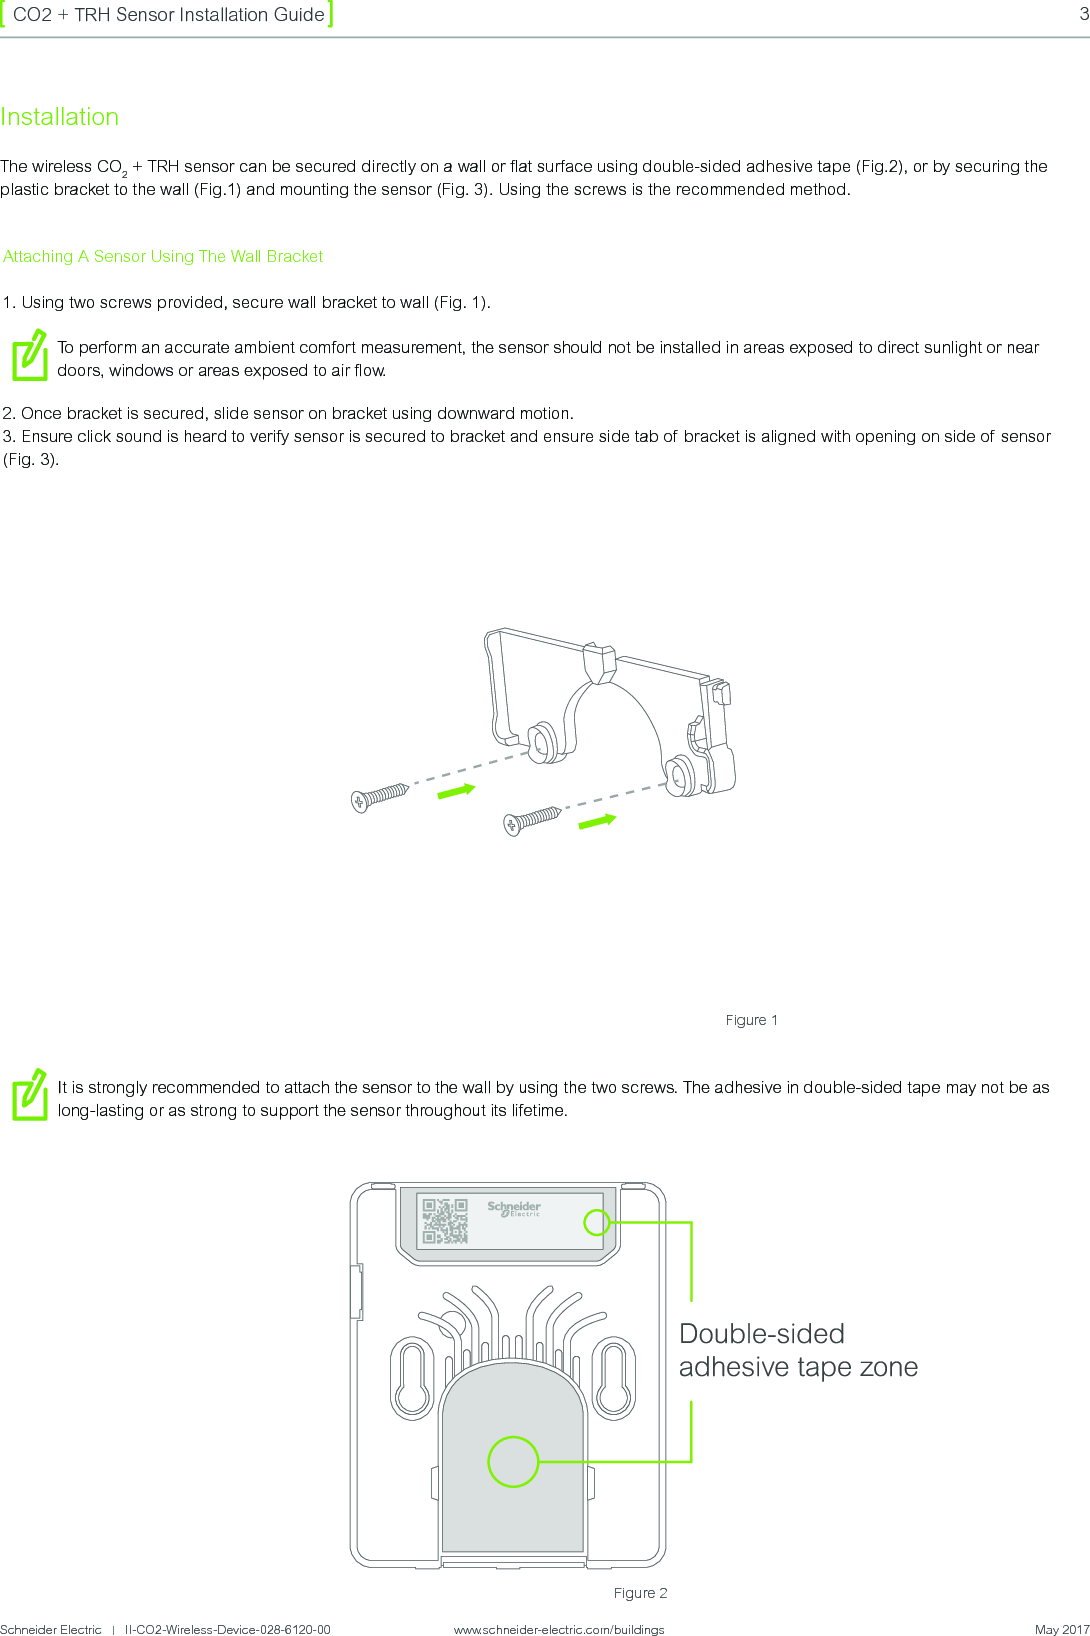 Schneider Electric   |   II-CO2-Wireless-Device-028-6120-00                    www.schneider-electric.com/buildings  May 20173CO2 + TRH Sensor Installation GuideFigure 2InstallationThe wireless CO2 + TRH sensor can be secured directly on a wall or ﬂat surface using double-sided adhesive tape (Fig.2), or by securing the plastic bracket to the wall (Fig.1) and mounting the sensor (Fig. 3). Using the screws is the recommended method.Figure 1Double-sided adhesive tape zoneAttaching A Sensor Using The Wall Bracket1. Using two screws provided, secure wall bracket to wall (Fig. 1).To perform an accurate ambient comfort measurement, the sensor should not be installed in areas exposed to direct sunlight or near doors, windows or areas exposed to air ow.2. Once bracket is secured, slide sensor on bracket using downward motion. 3. Ensure click sound is heard to verify sensor is secured to bracket and ensure side tab of  bracket is aligned with opening on side of sensor (Fig. 3).It is strongly recommended to attach the sensor to the wall by using the two screws. The adhesive in double-sided tape may not be as long-lasting or as strong to support the sensor throughout its lifetime.